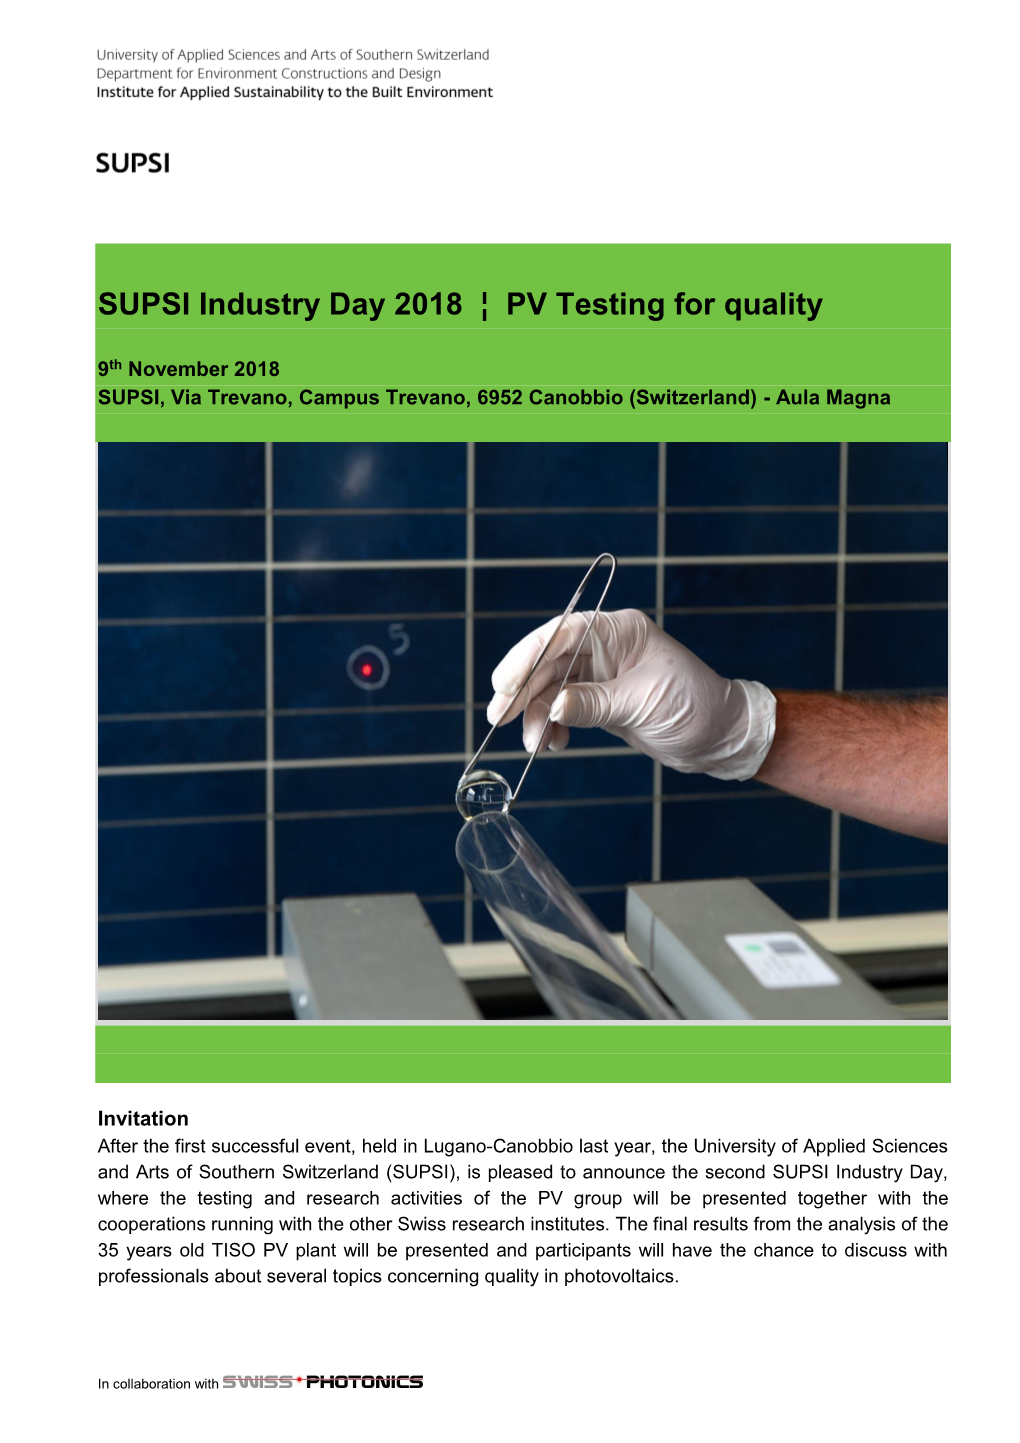 SUPSI Industry Day 2018 ¦ PV Testing for Quality